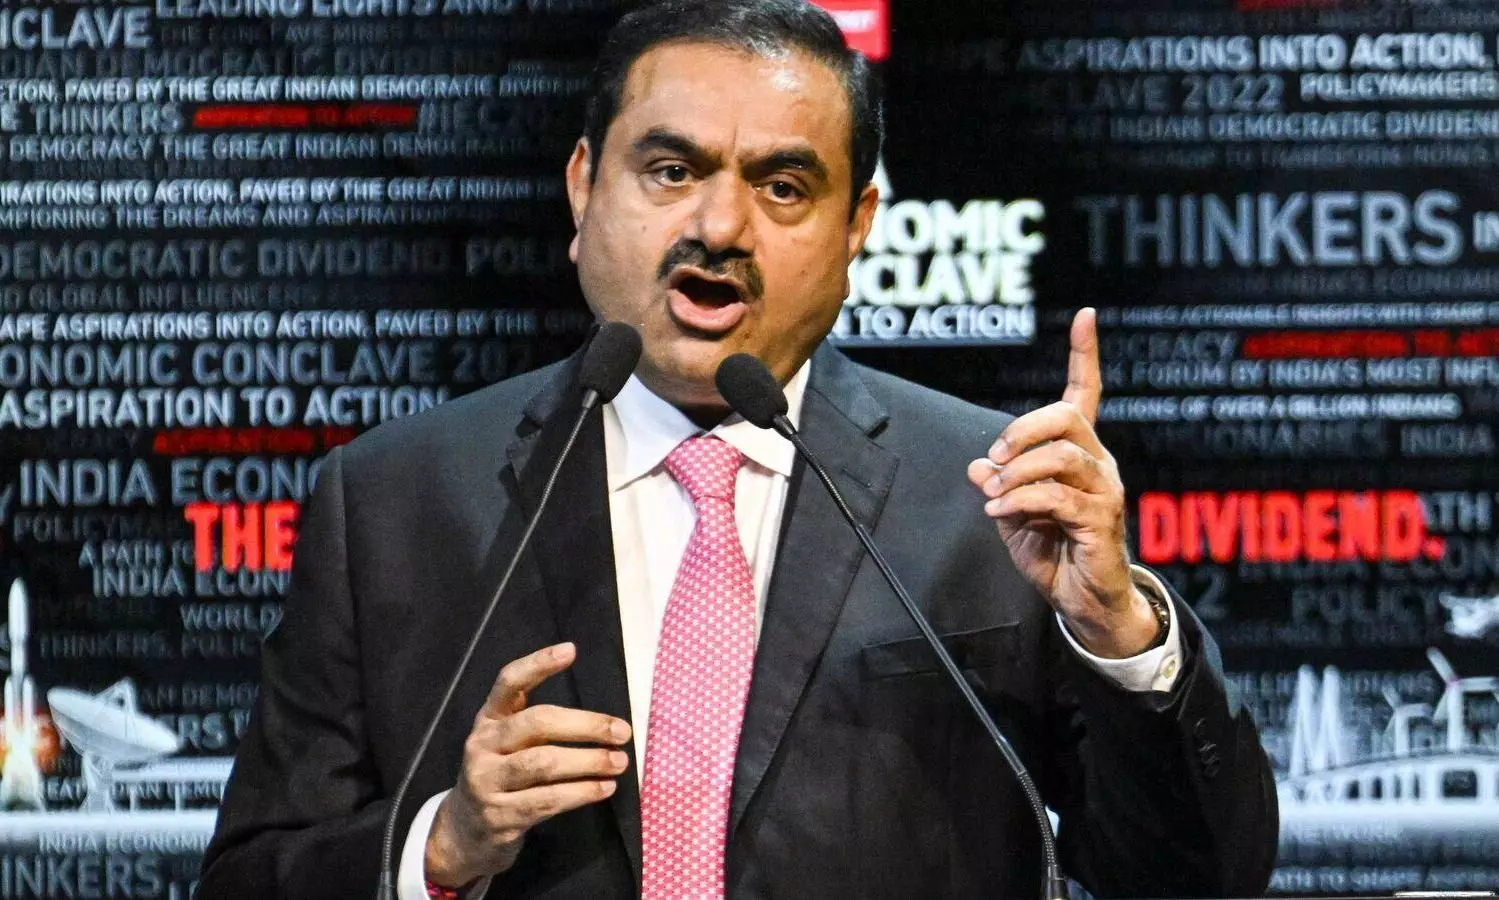 Adani owns over 50% share in IANS to boost media influence